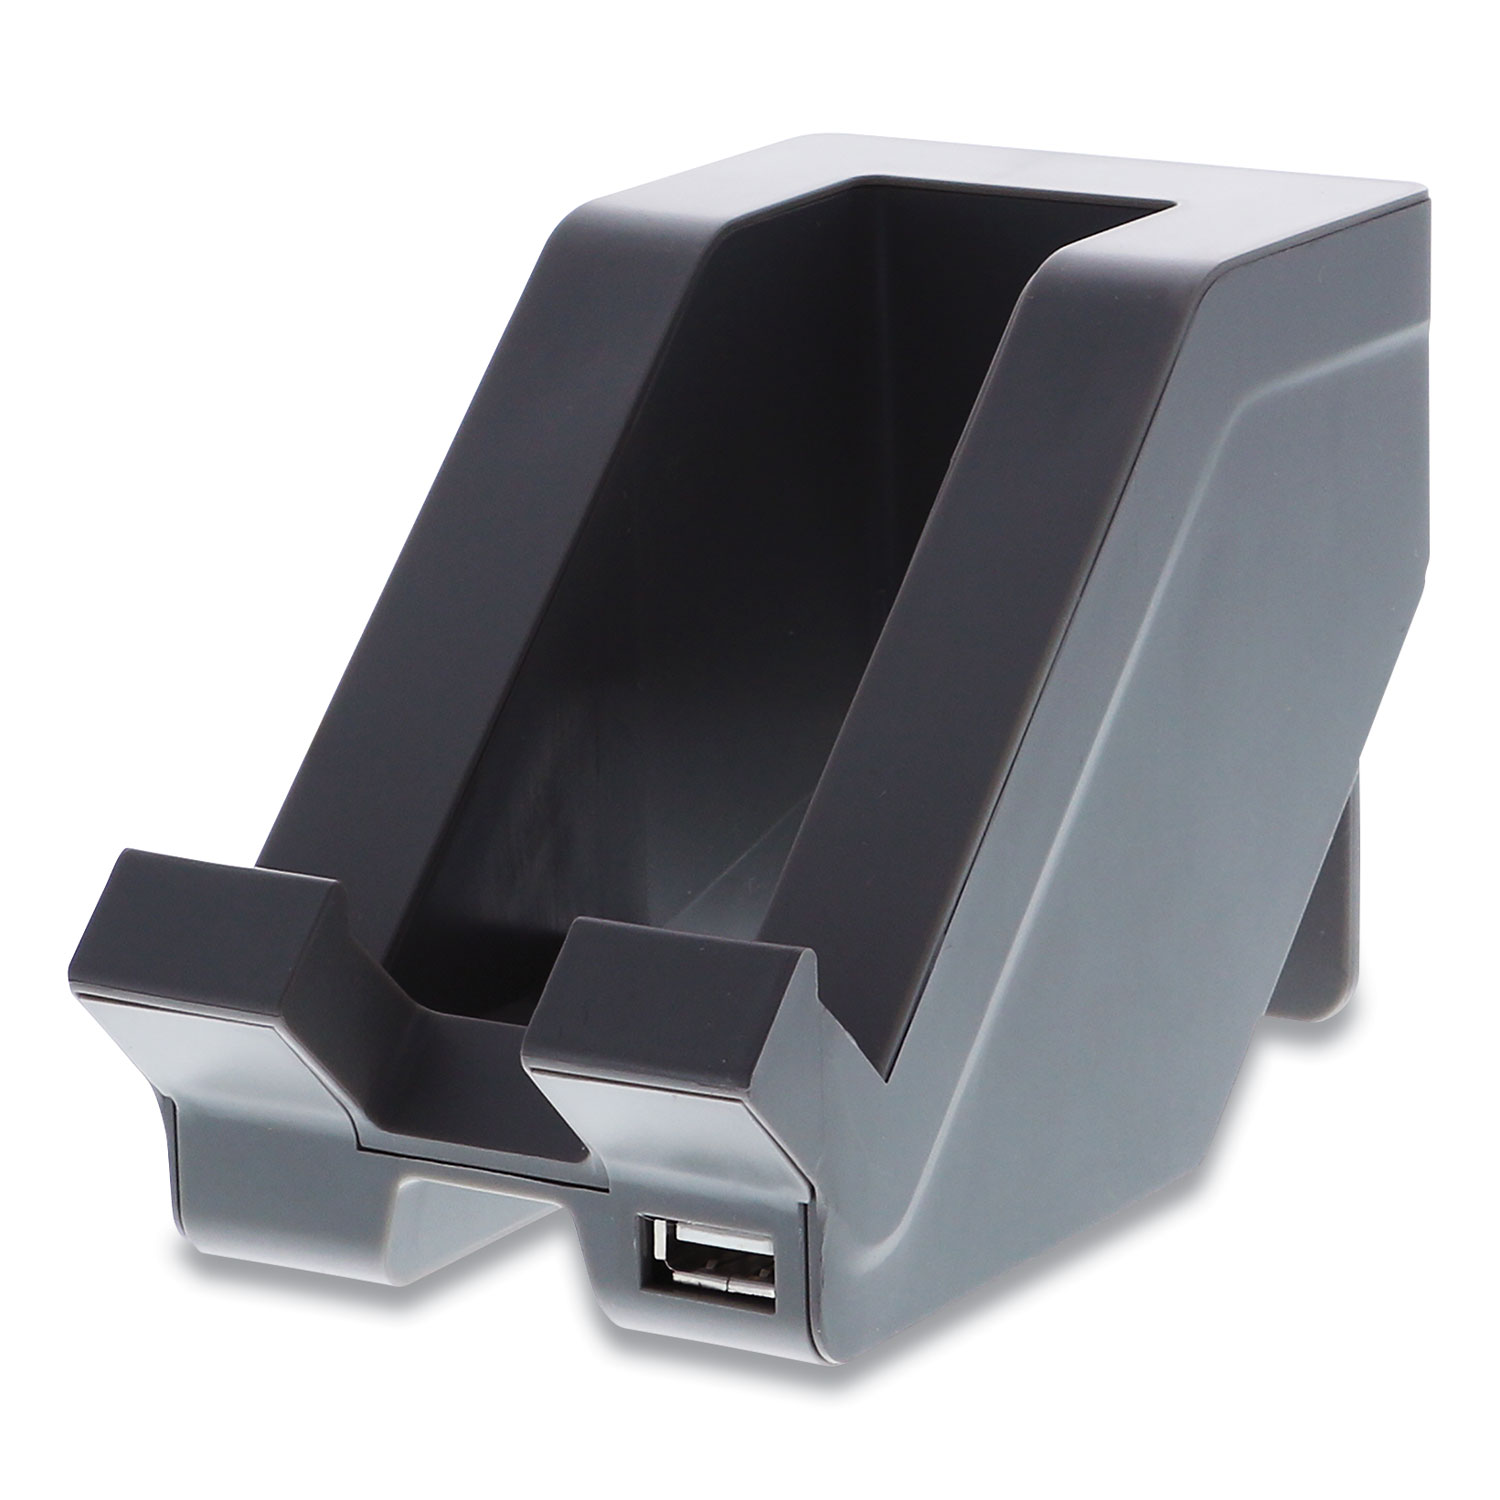  Bostitch KT-PHONE-GRAY Konnect Plastic Phone Dock with USB Port, For Use With Phones and Tablets, 3 x 3.5 x 5, Gray (BOS24340010) 